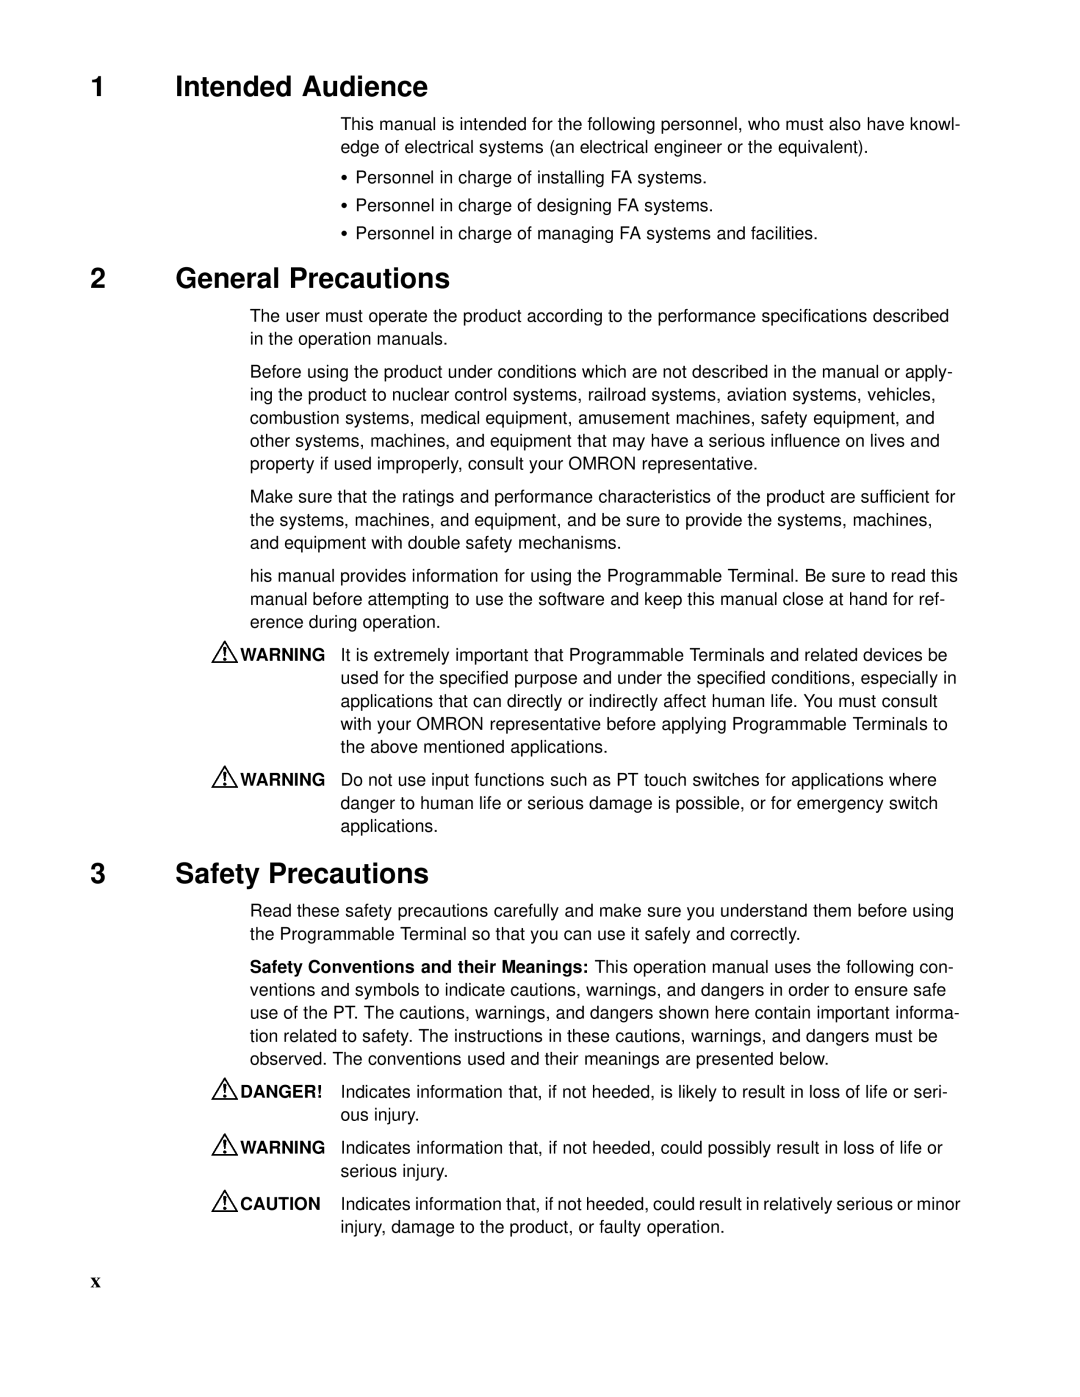 Omron V022-E3-1 operation manual Intended Audience, General Precautions, Safety Precautions 